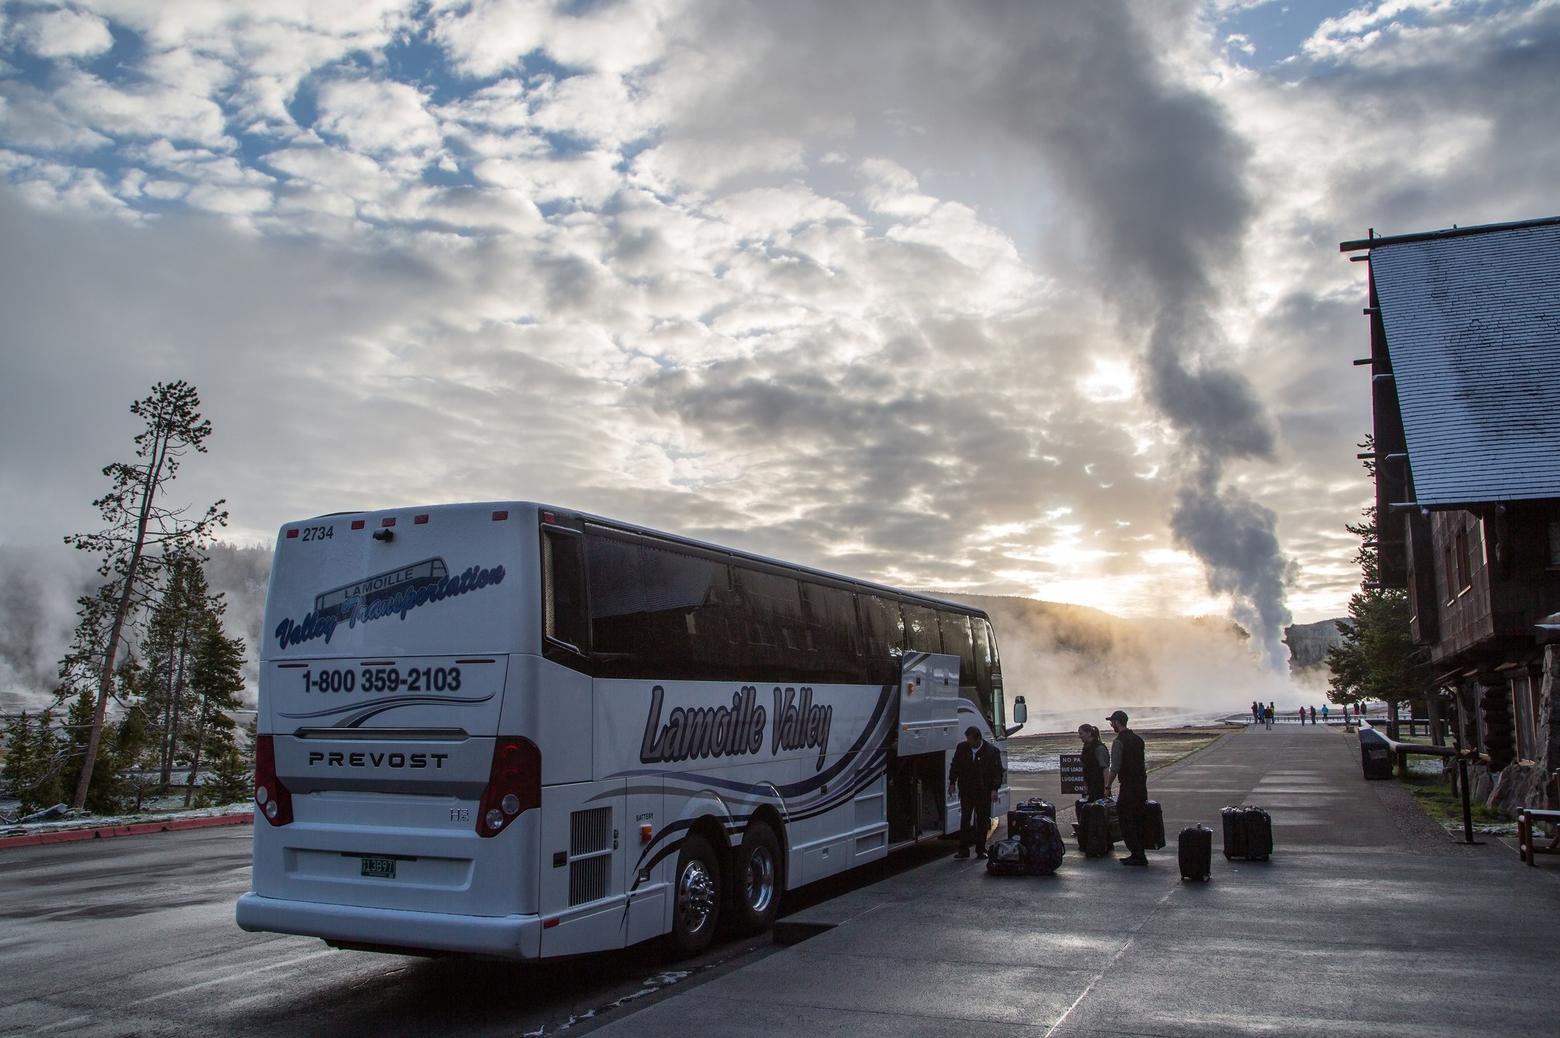 A commercial bus arrives at Old Faithful in Yellowstone. Bus tours bring huge crowding impacts to national parks and a small excise tax imposed on companies and passengers could generate significant revenue to be applied to landscape protection. Photo courtesy Yellowstone National Park